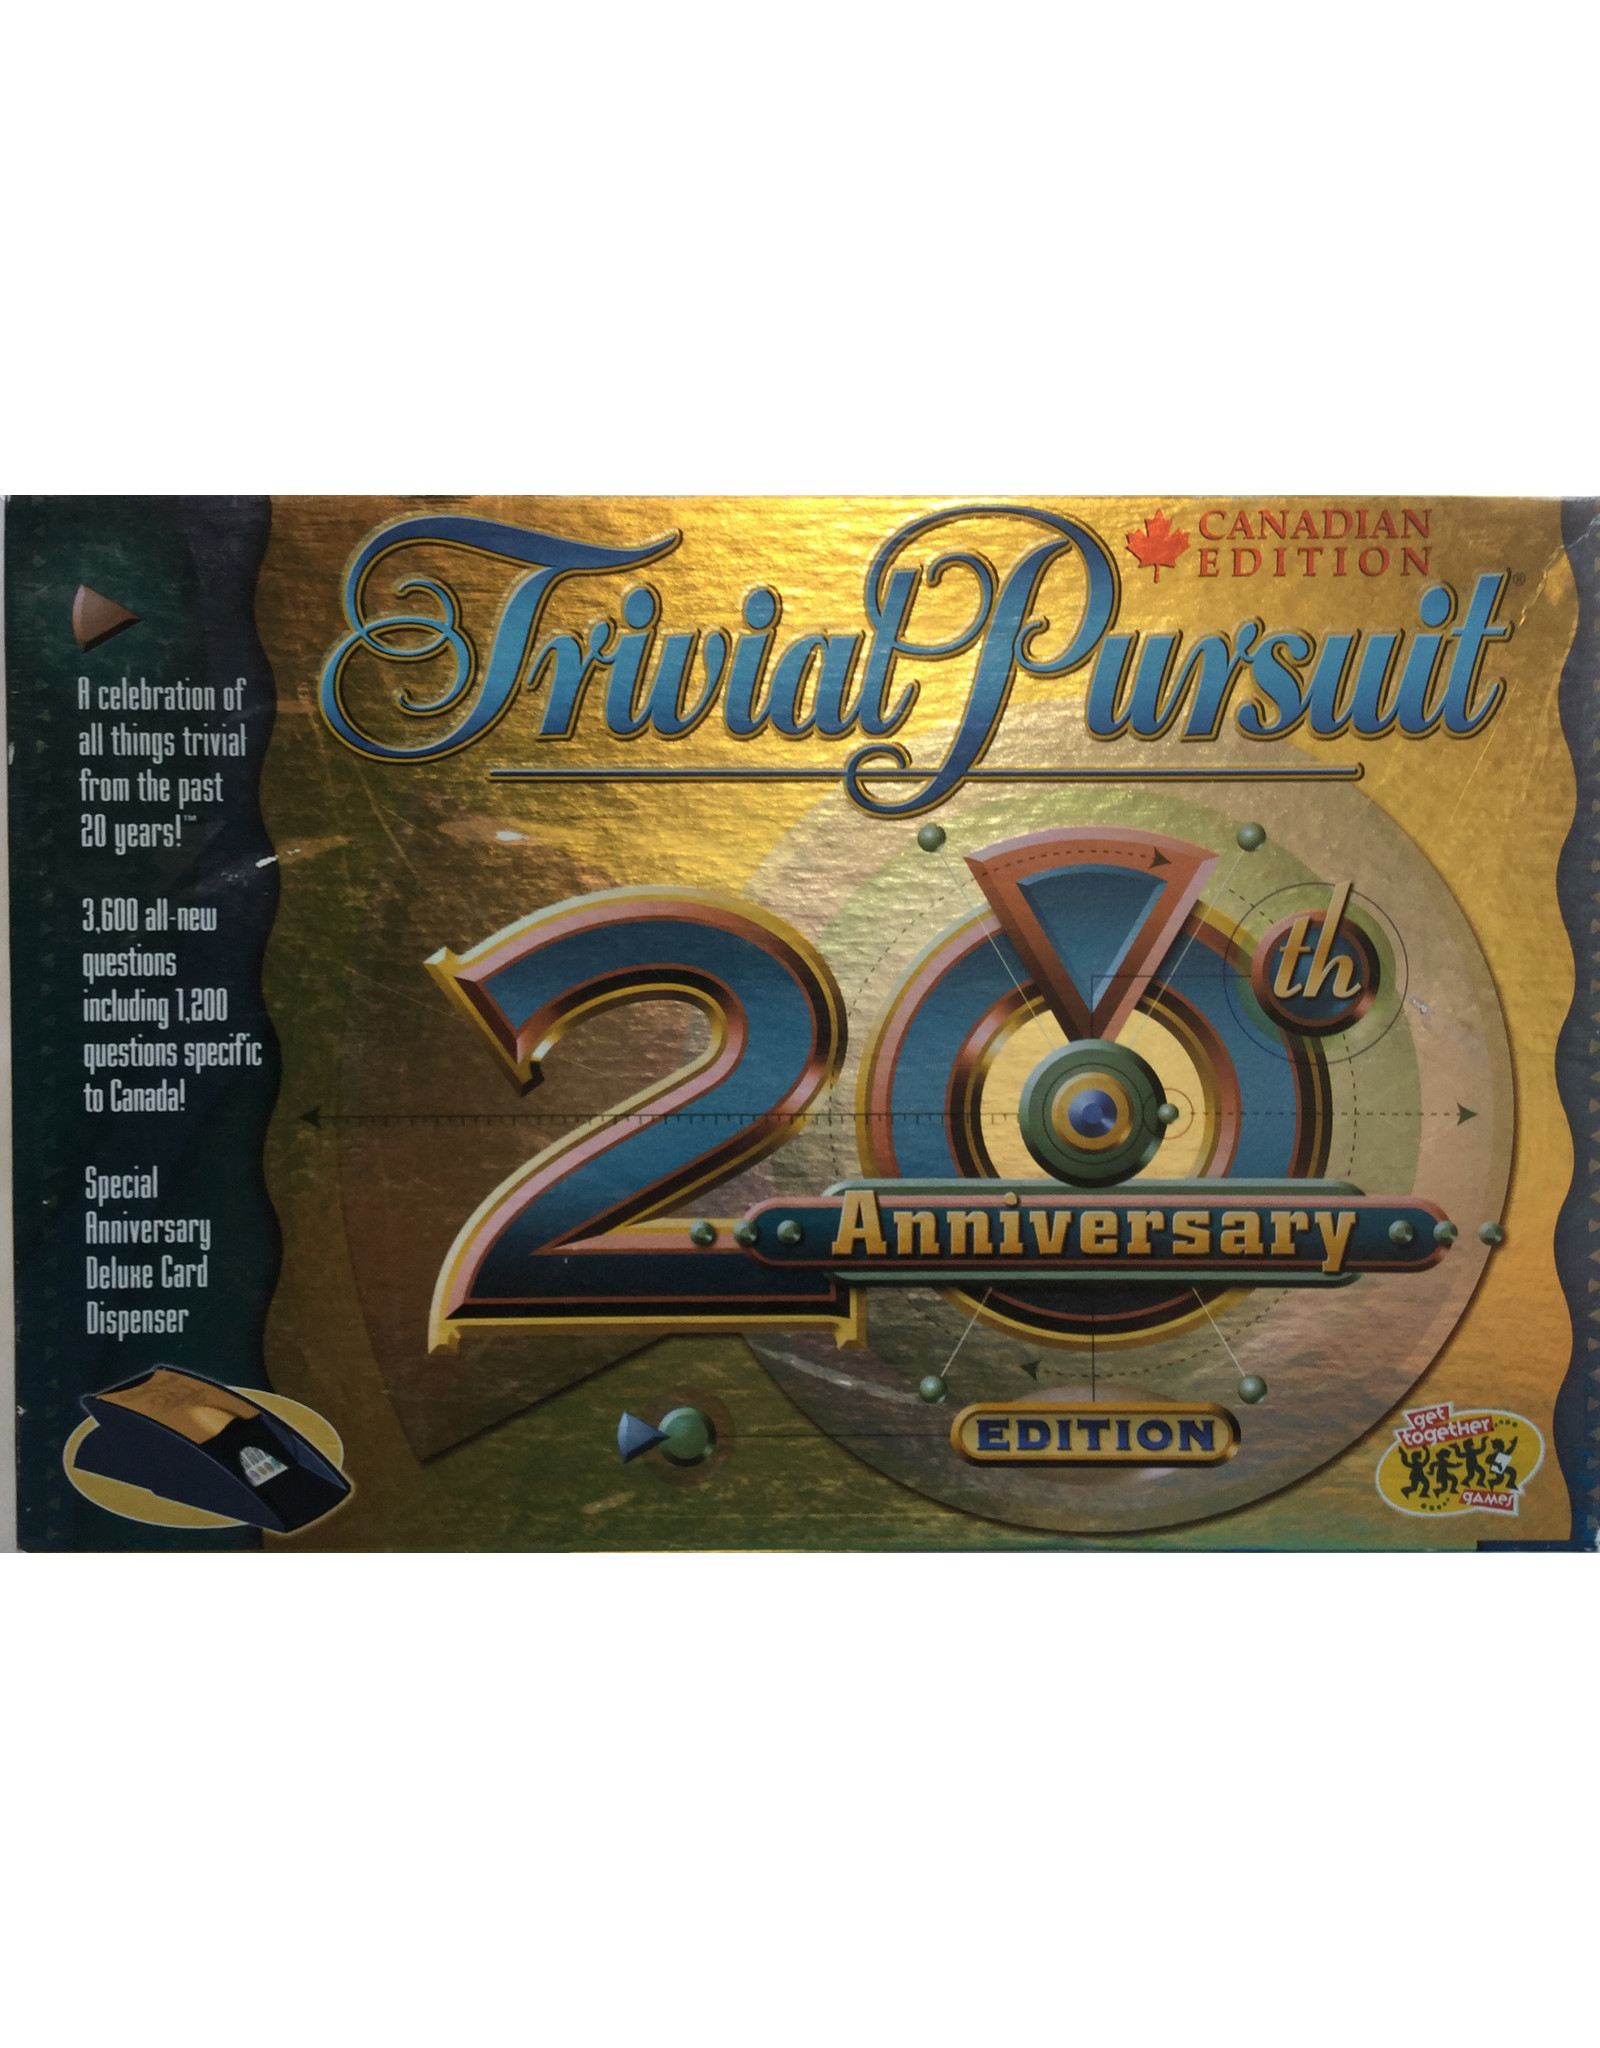 Horn Abbot Trivial Pursuit 20th Anniversary Edition - Canadian Edition (2002)